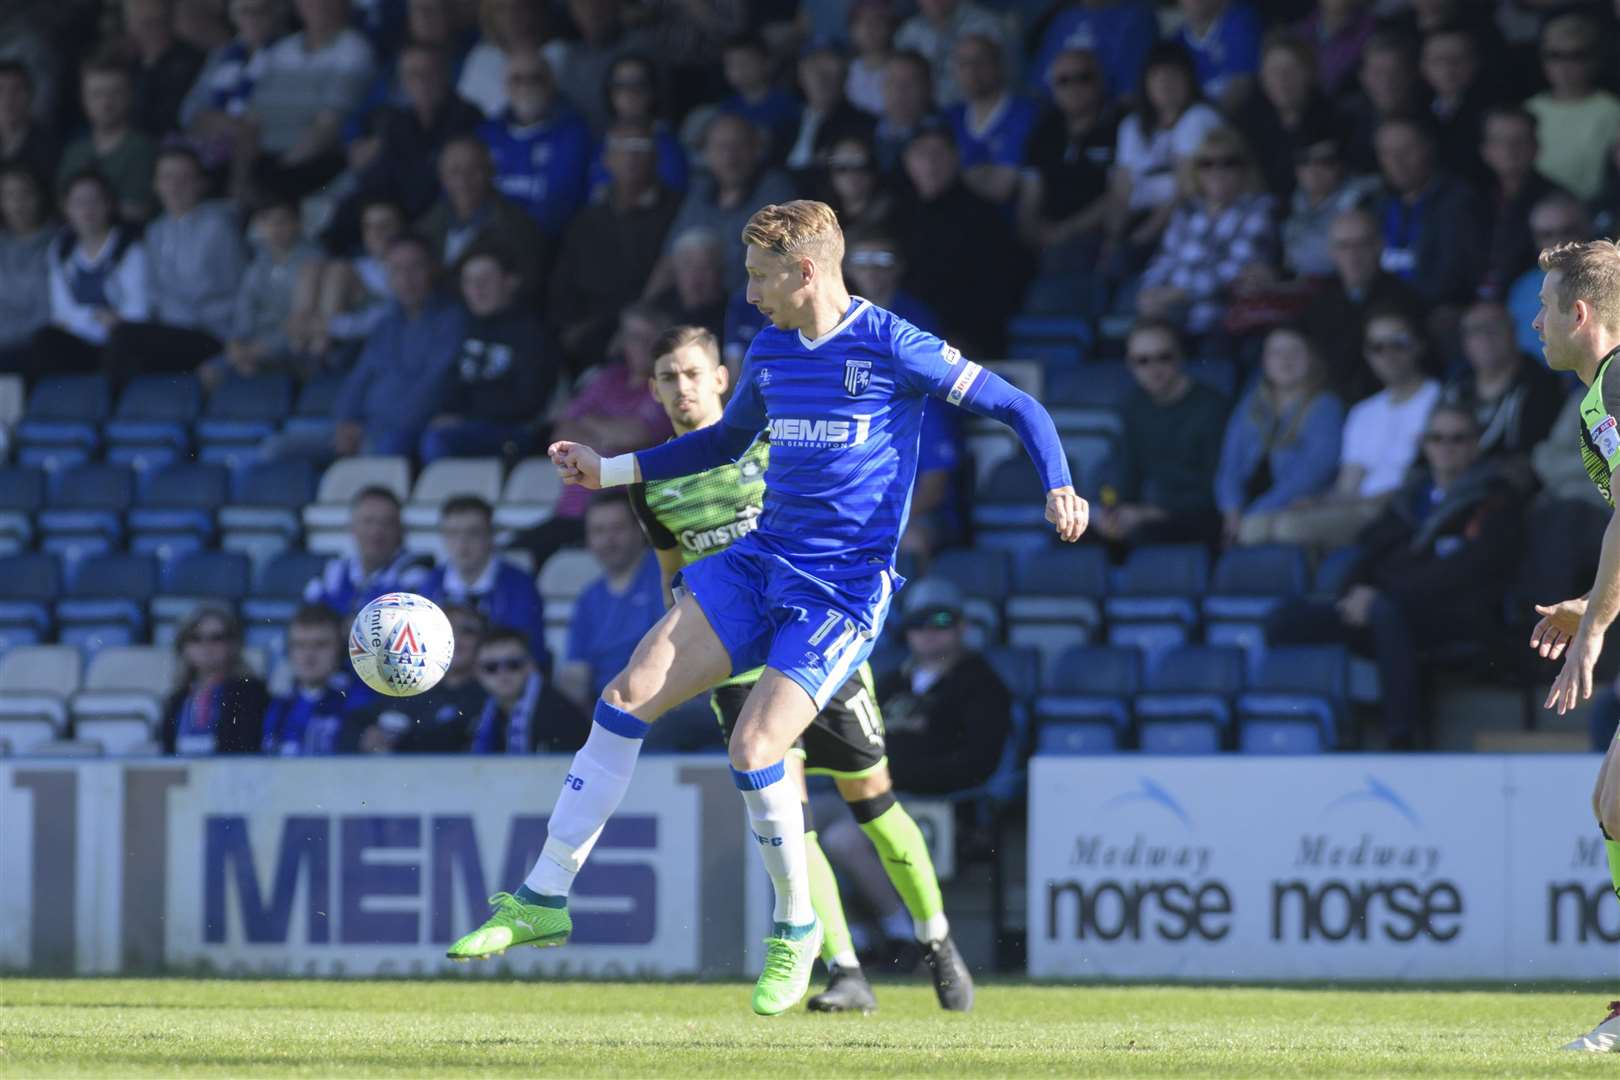 Lee Martin is leaving Gillingham along with six others